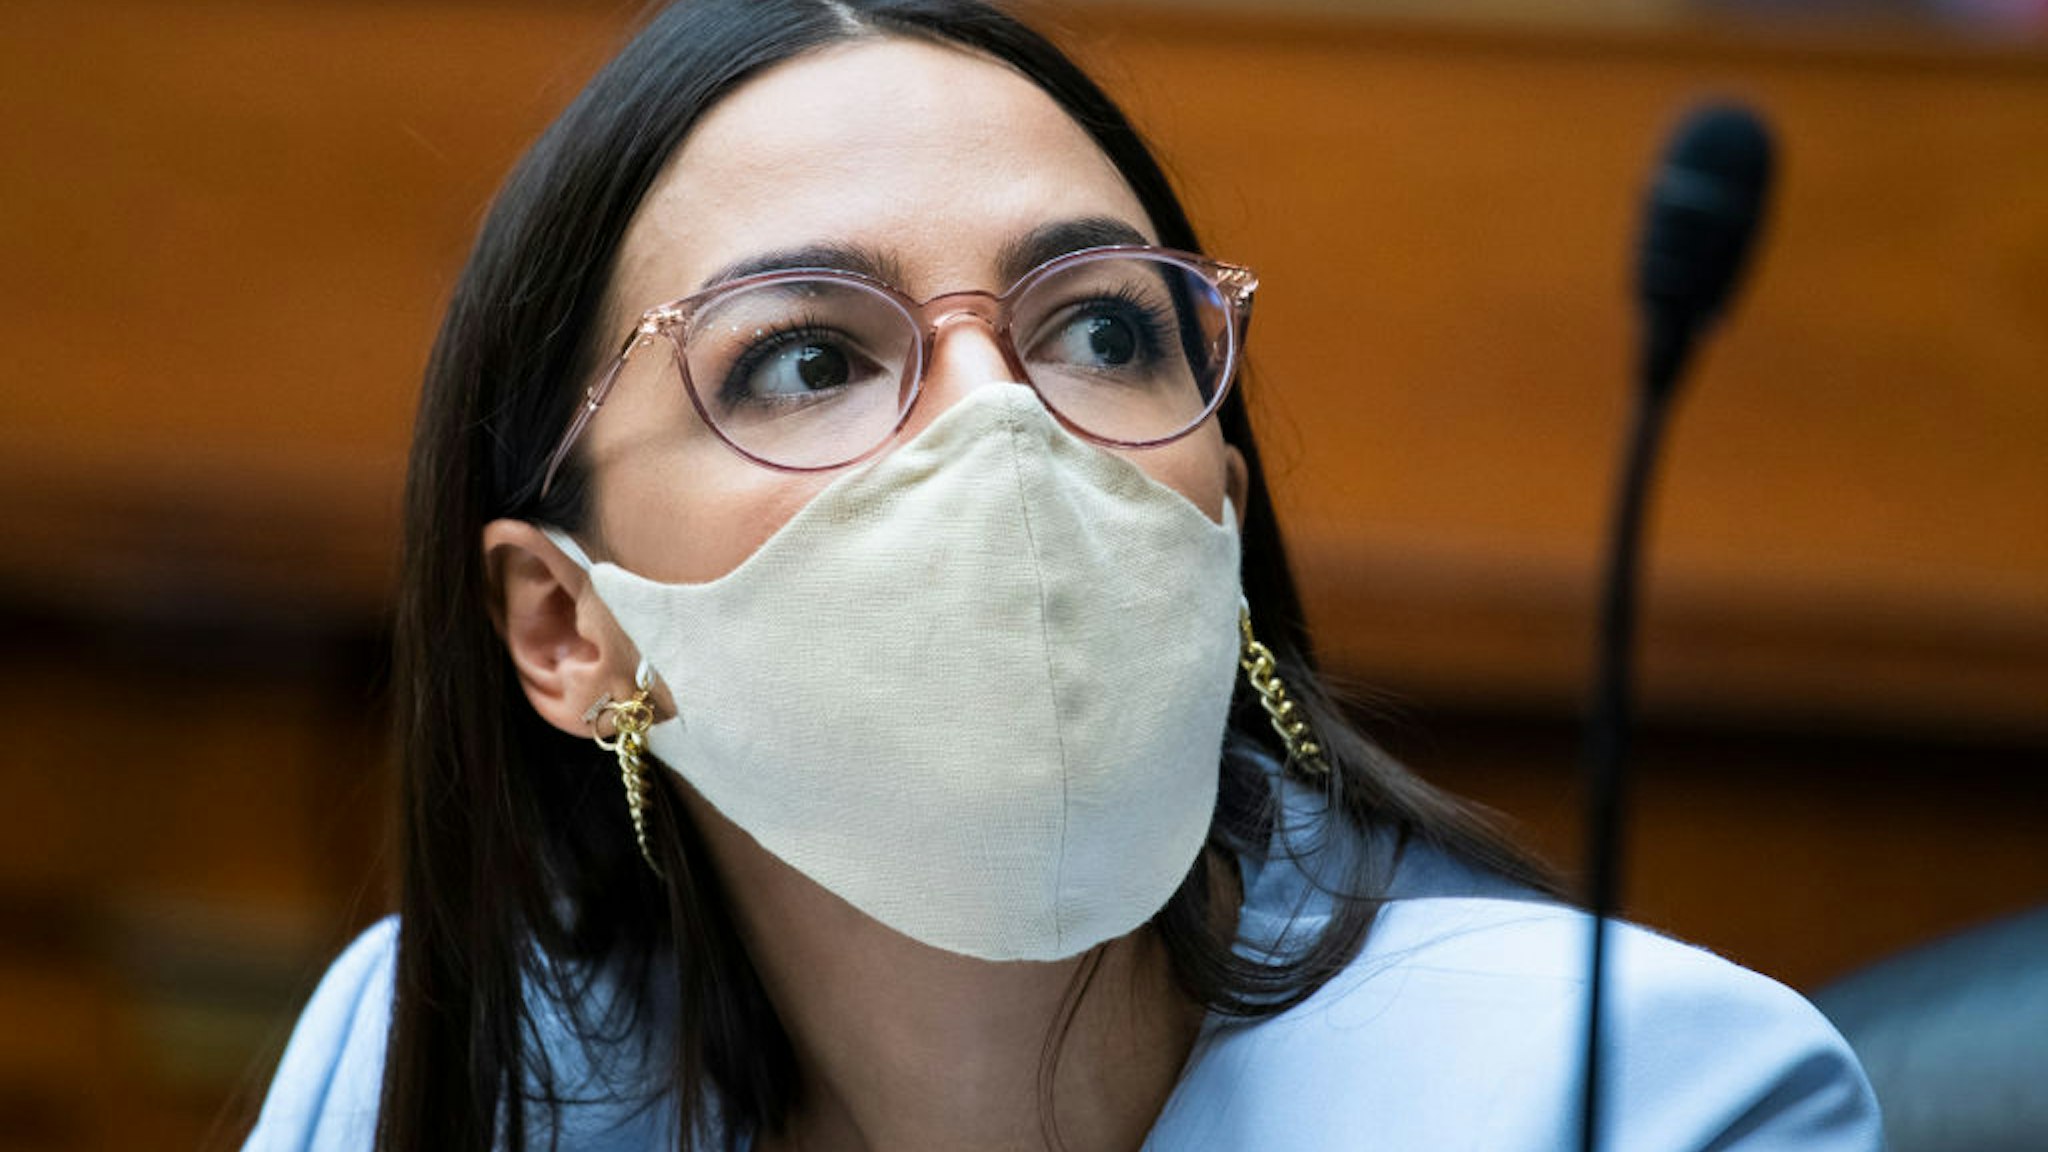 Representative Alexandria Ocasio-Cortez (D-NY), is seen as U.S. Postal Service Postmaster General Louis DeJoy testifies during a hearing before the House Oversight and Reform Committee on August 24, 2020 on Capitol Hill in Washington, DC.